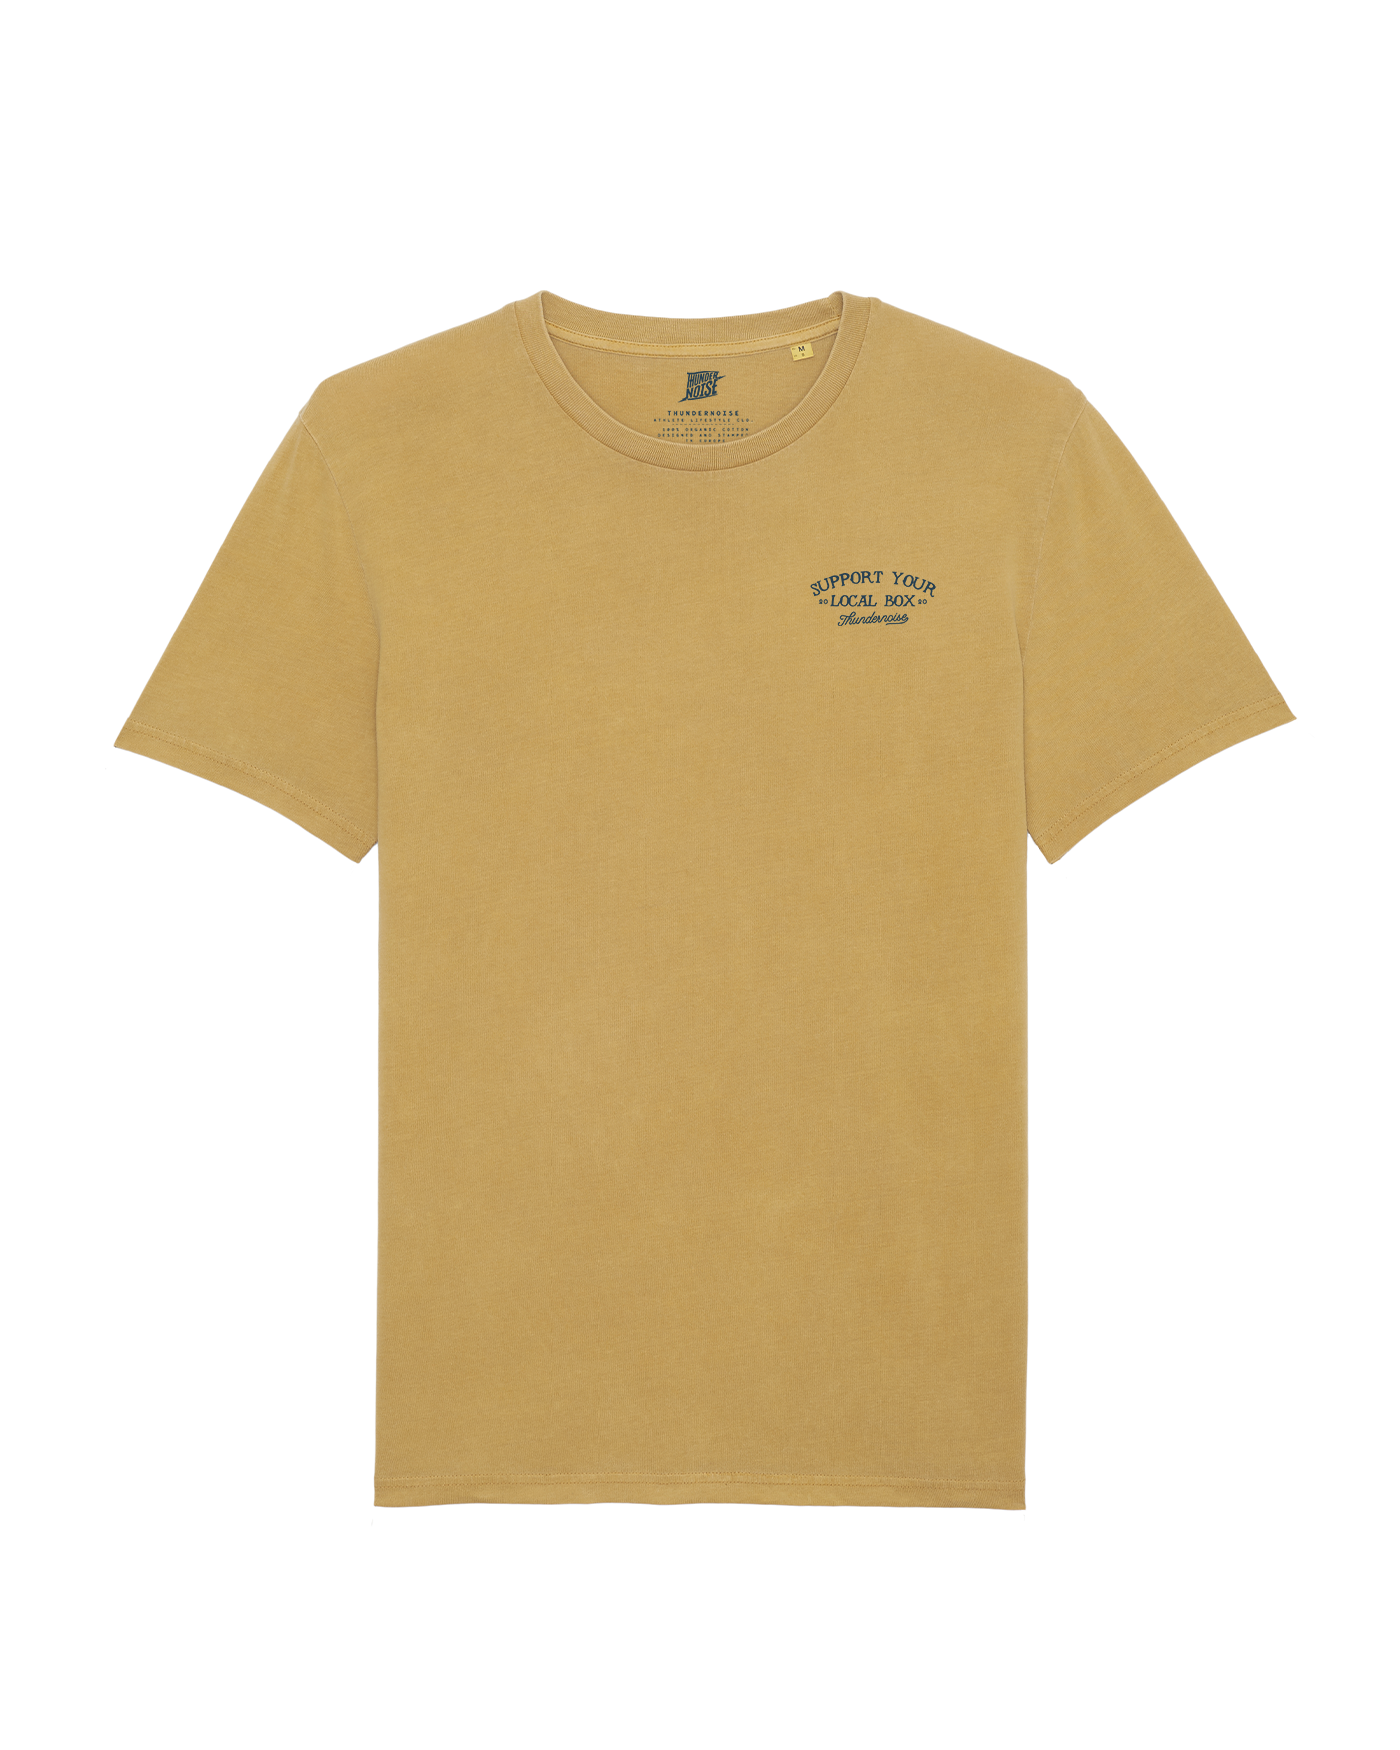 Support Your Local Box T-shirt - Aged Mustard